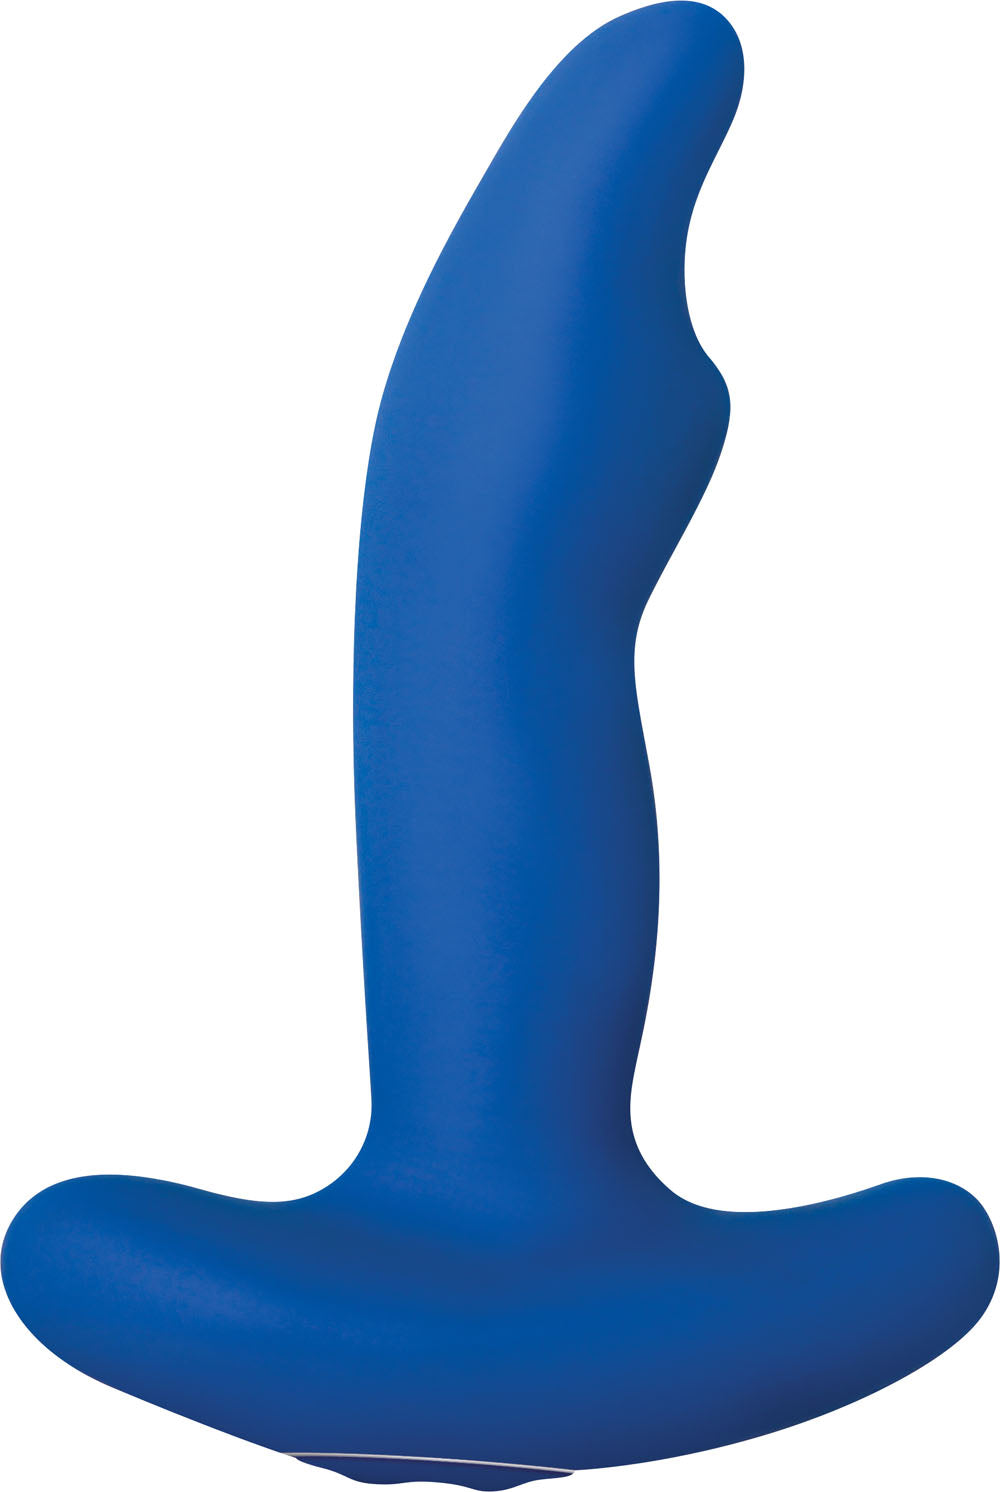 The Great Prostate ZE-AP-3084-2